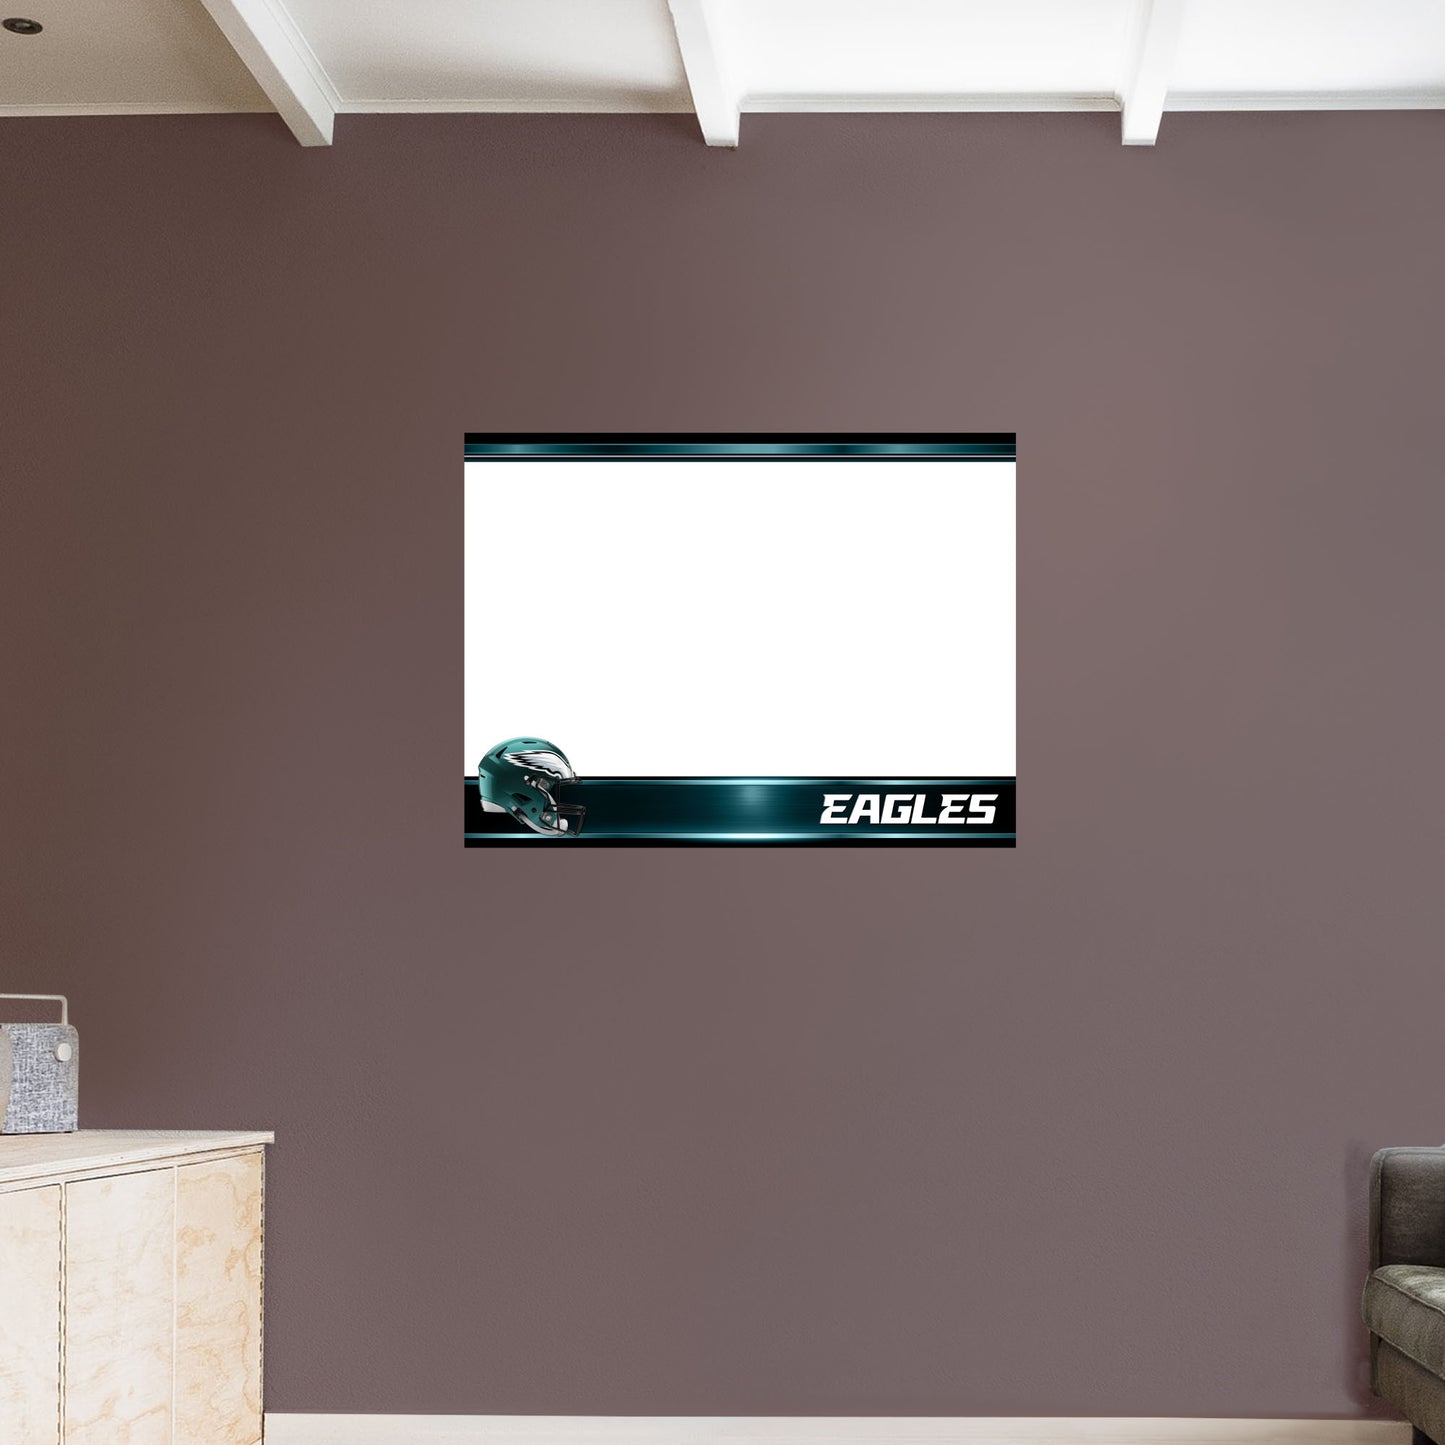 Philadelphia Eagles:   Helmet Dry Erase Whiteboard        - Officially Licensed NFL Removable     Adhesive Decal